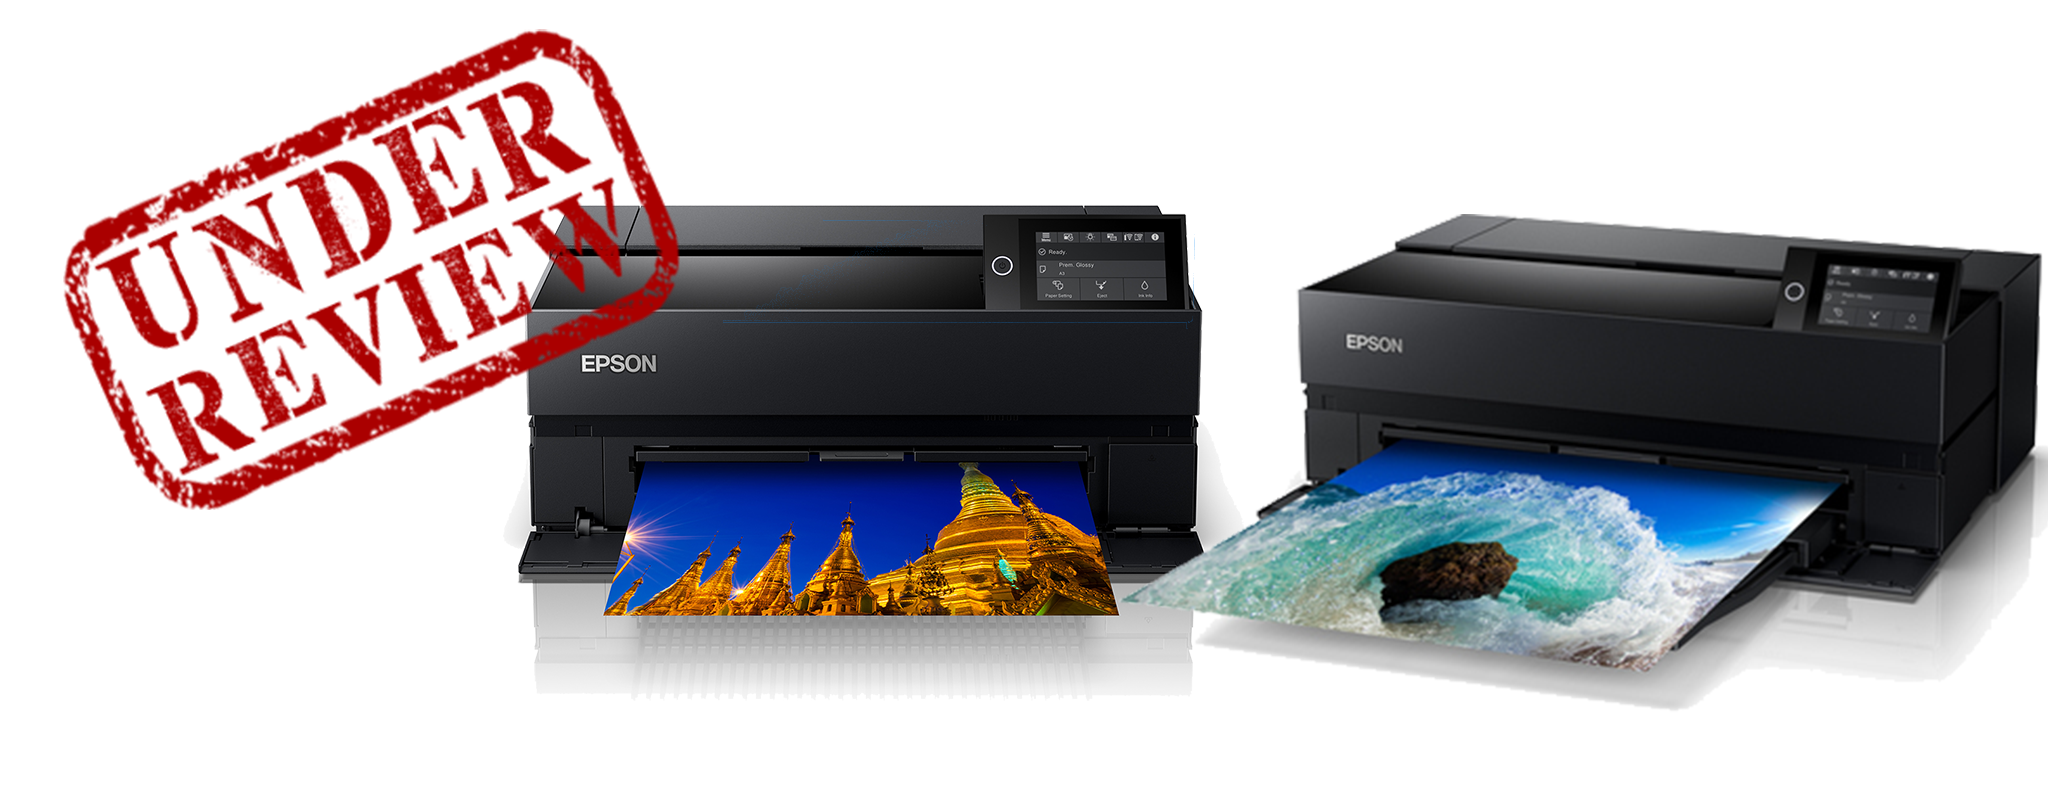 under-review-the-new-epson-p700-and-p900-printers-image-pro-international